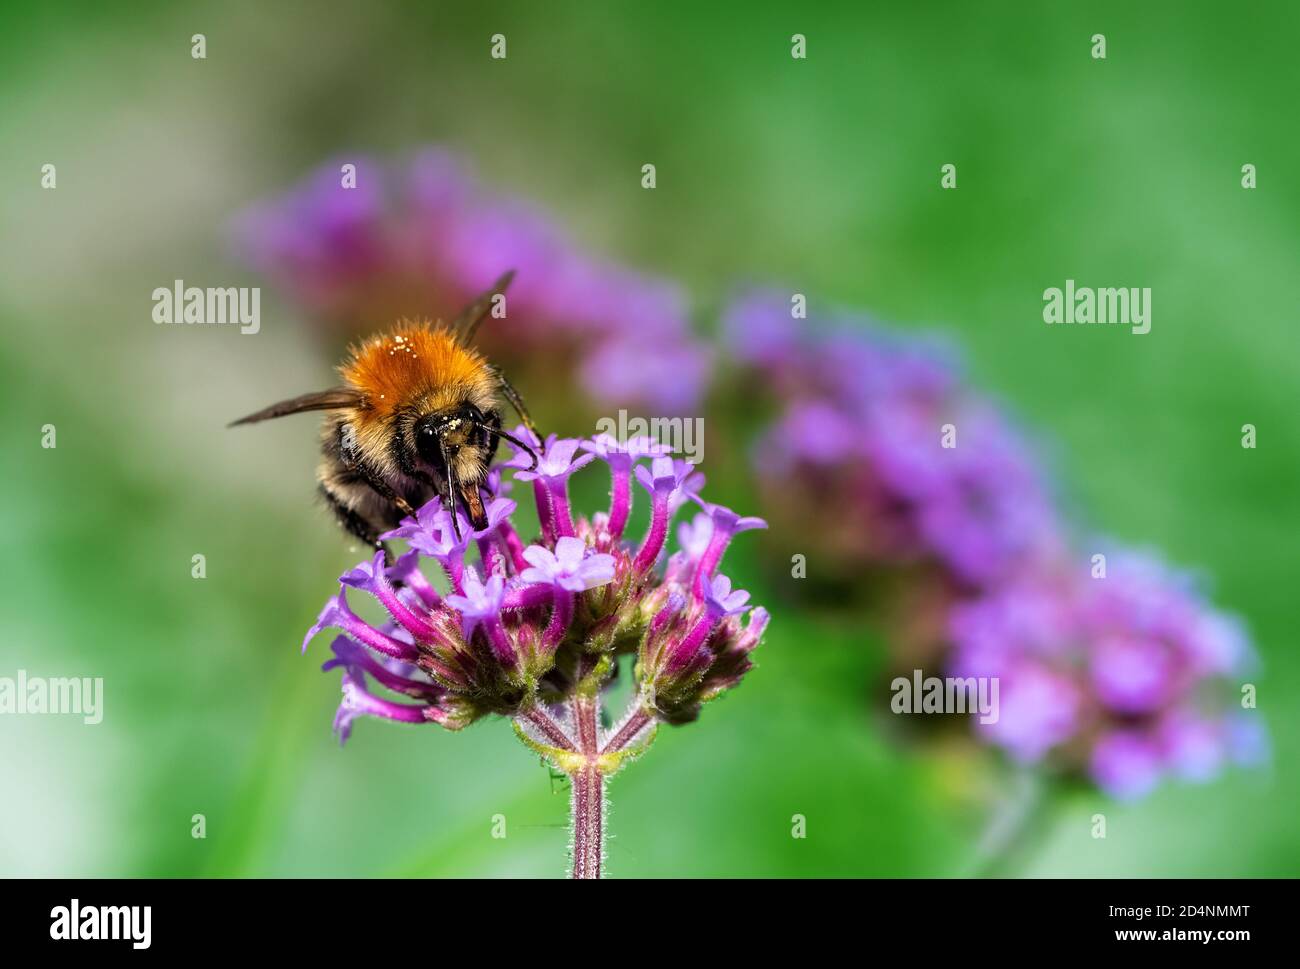 Macro of a common carder bee on a purple verbena flower blossom Stock Photo